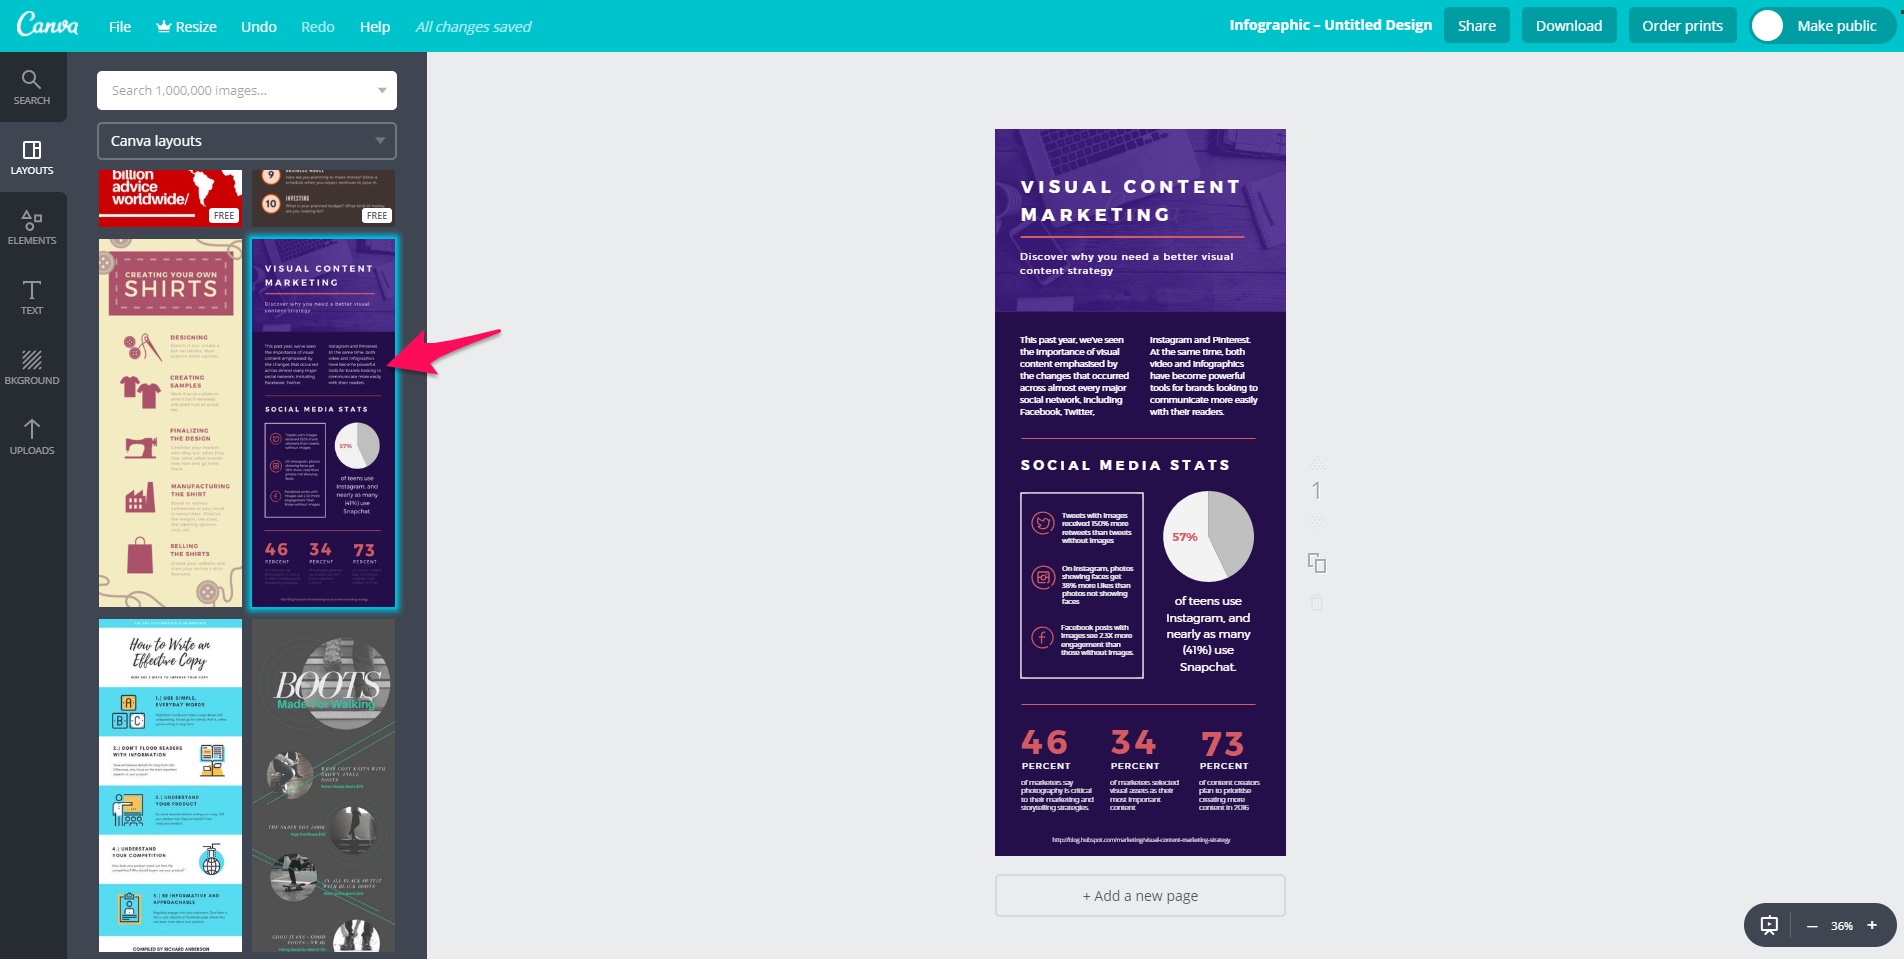 Creating an infographic on Canva